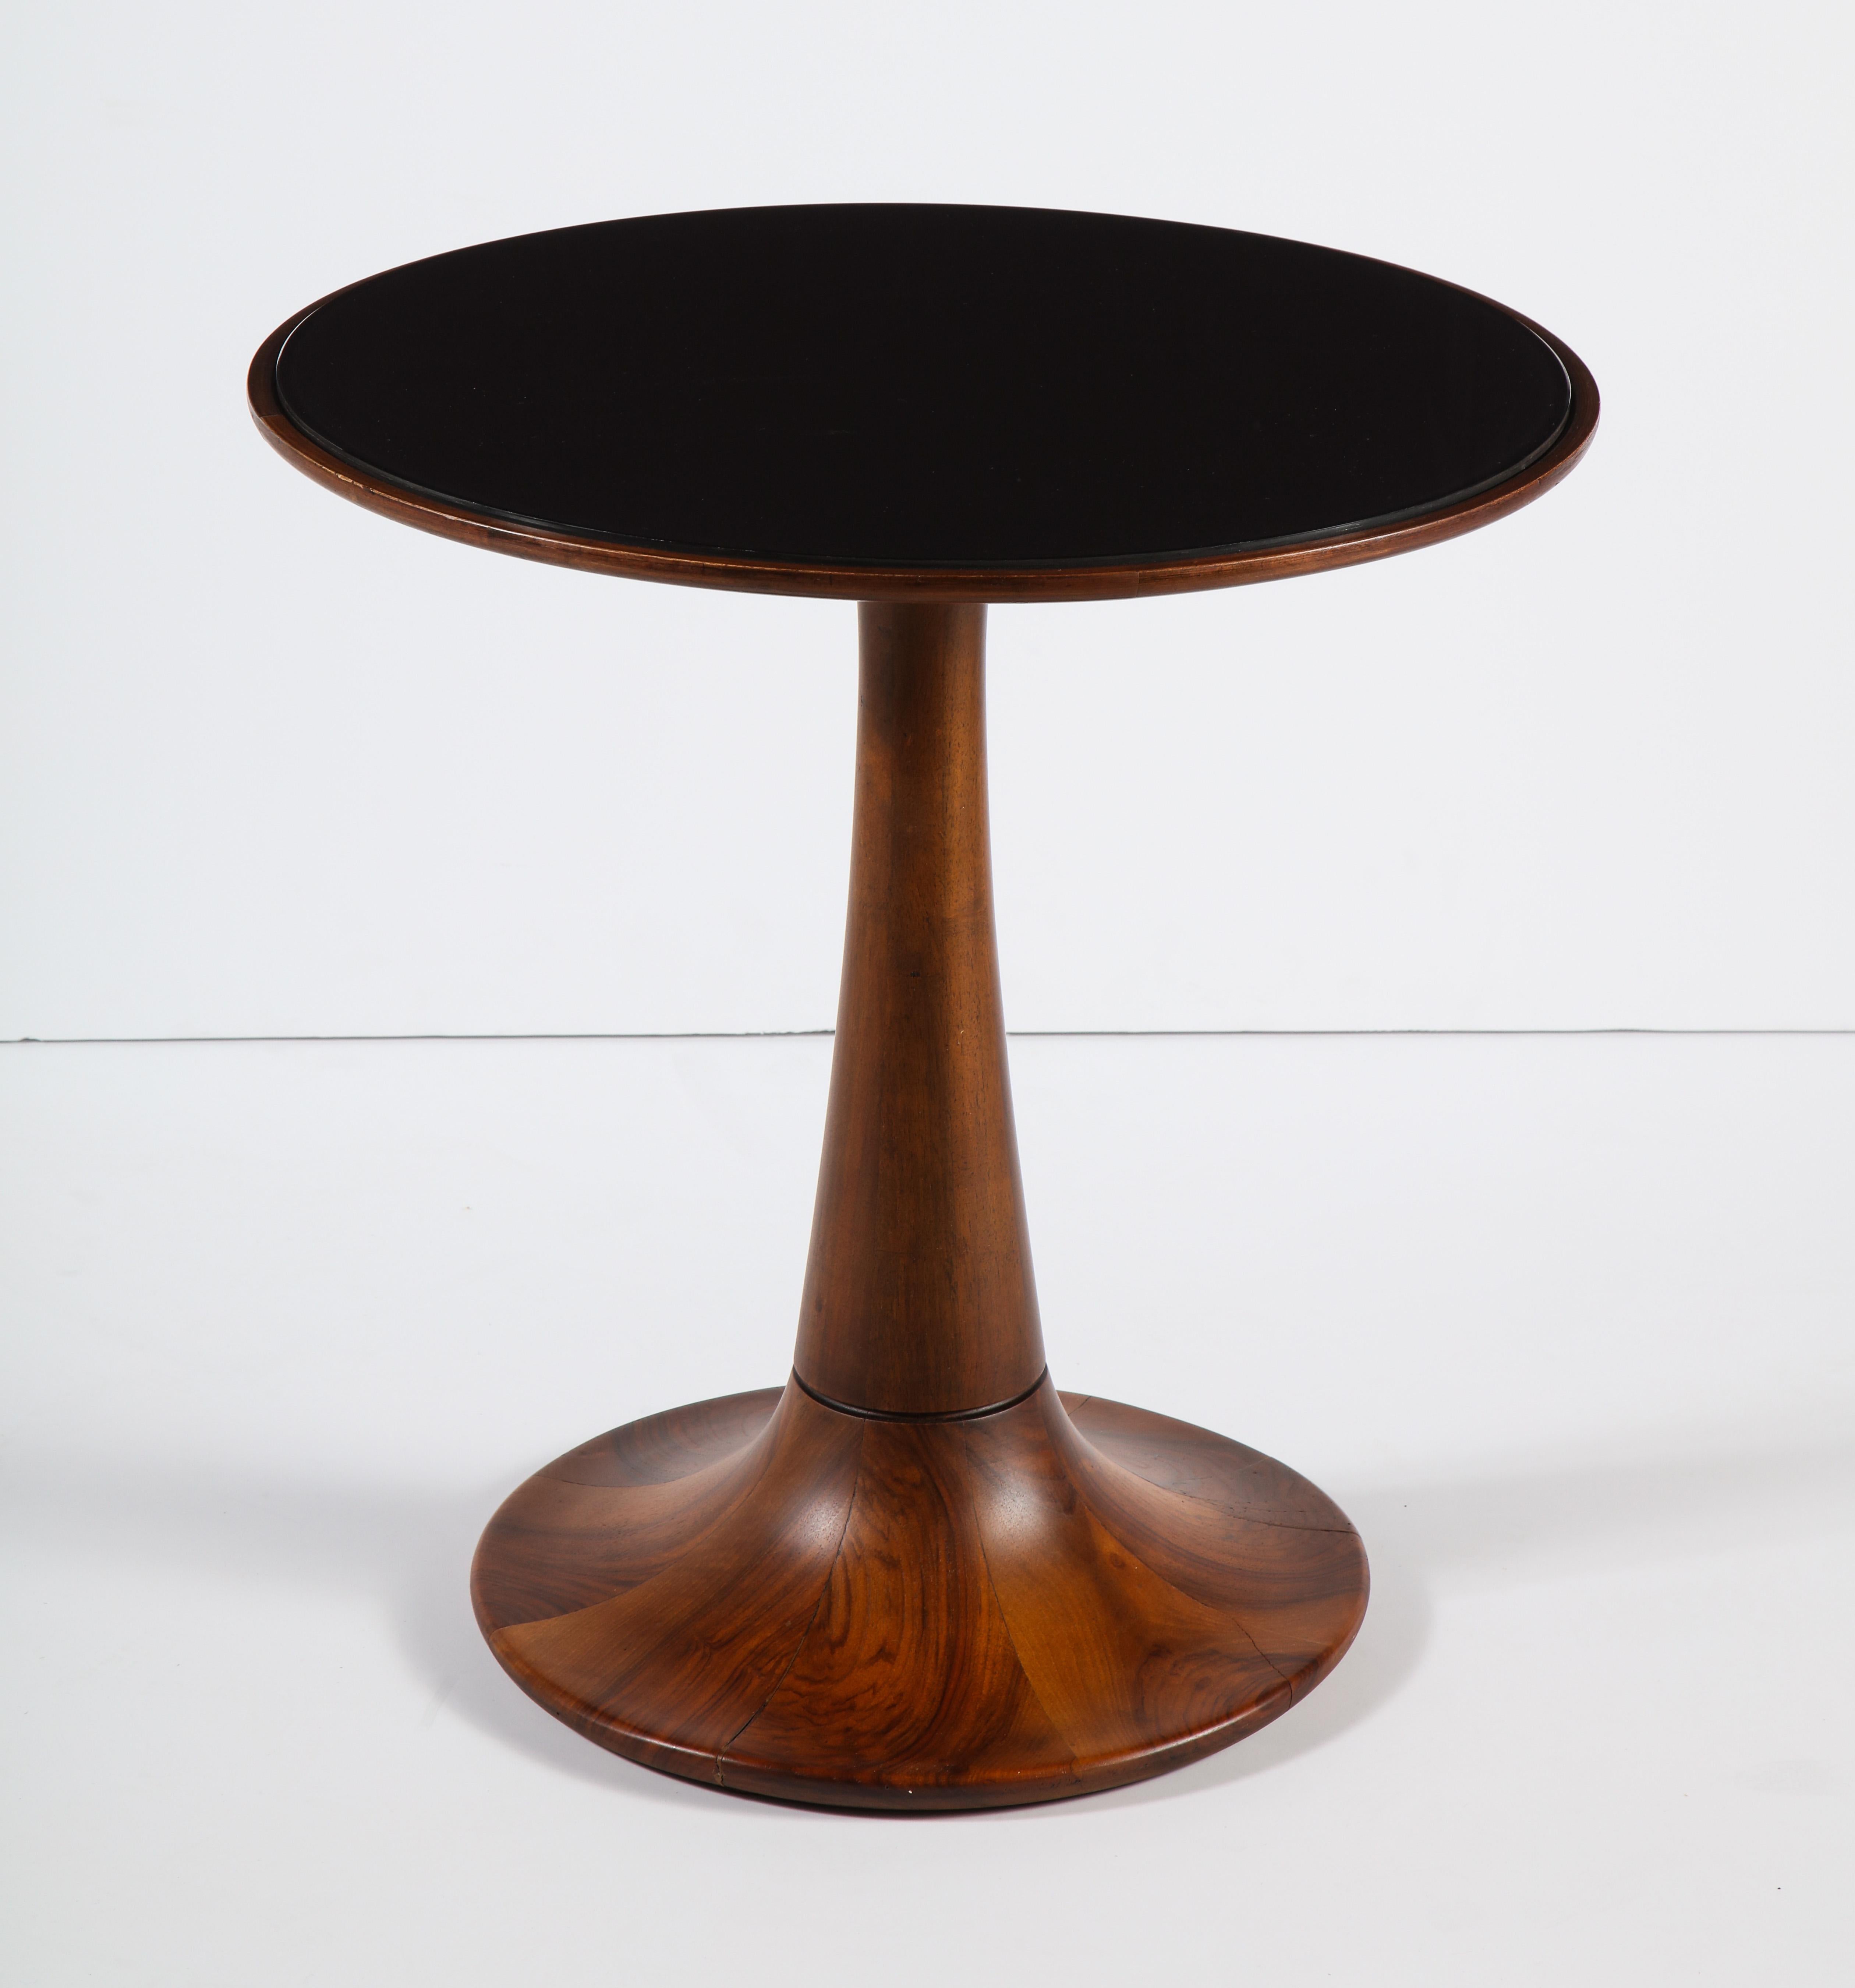 Italian Round Walnut Side Table with Black Glass Top, Italy, 1950s